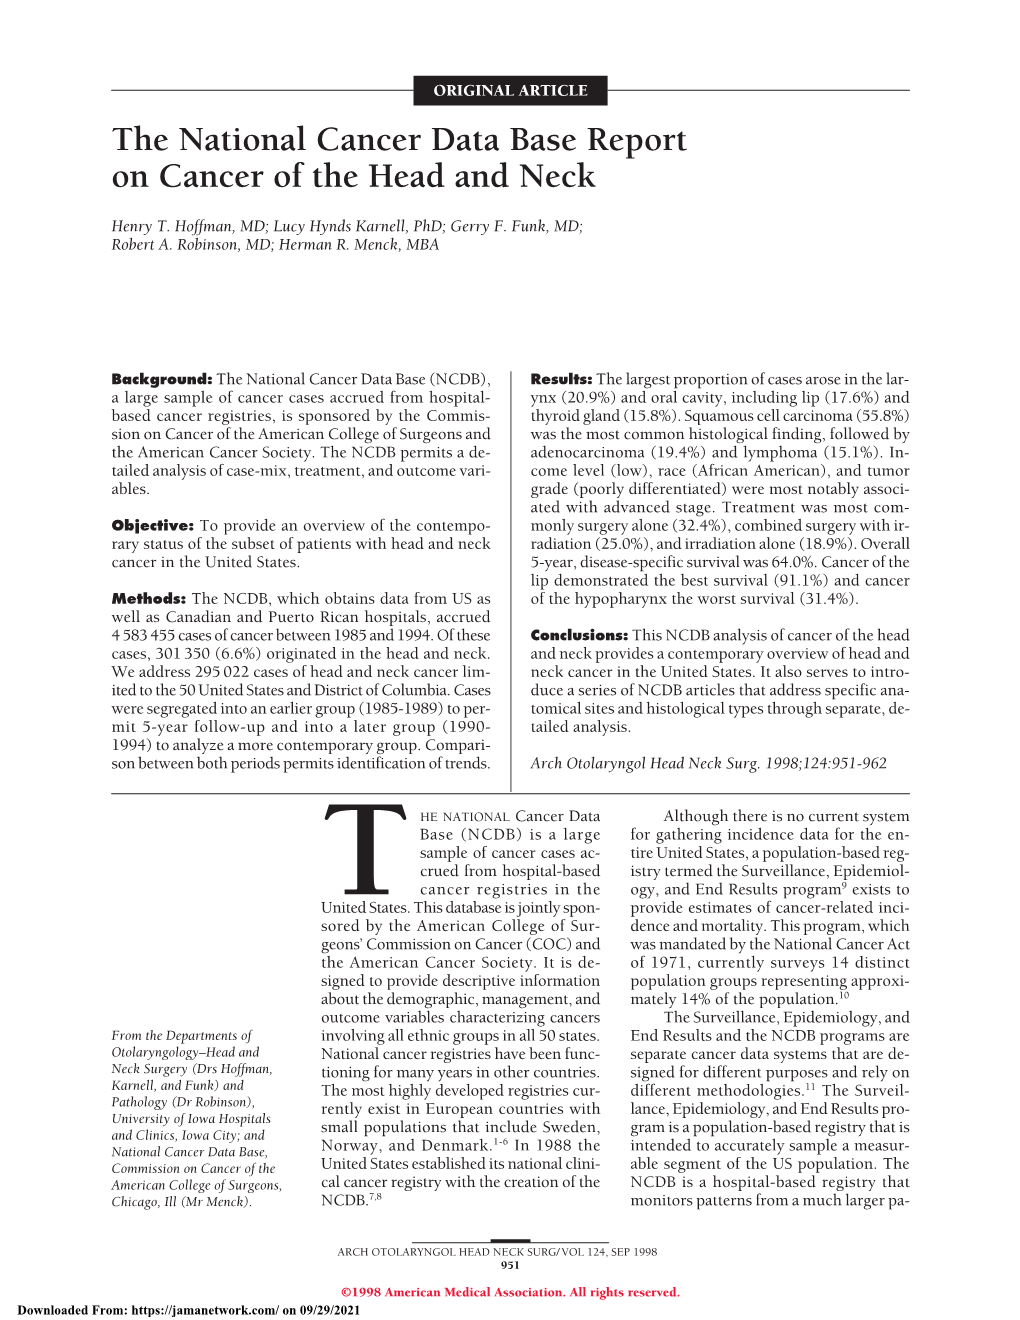 The National Cancer Data Base Report on Cancer of the Head and Neck